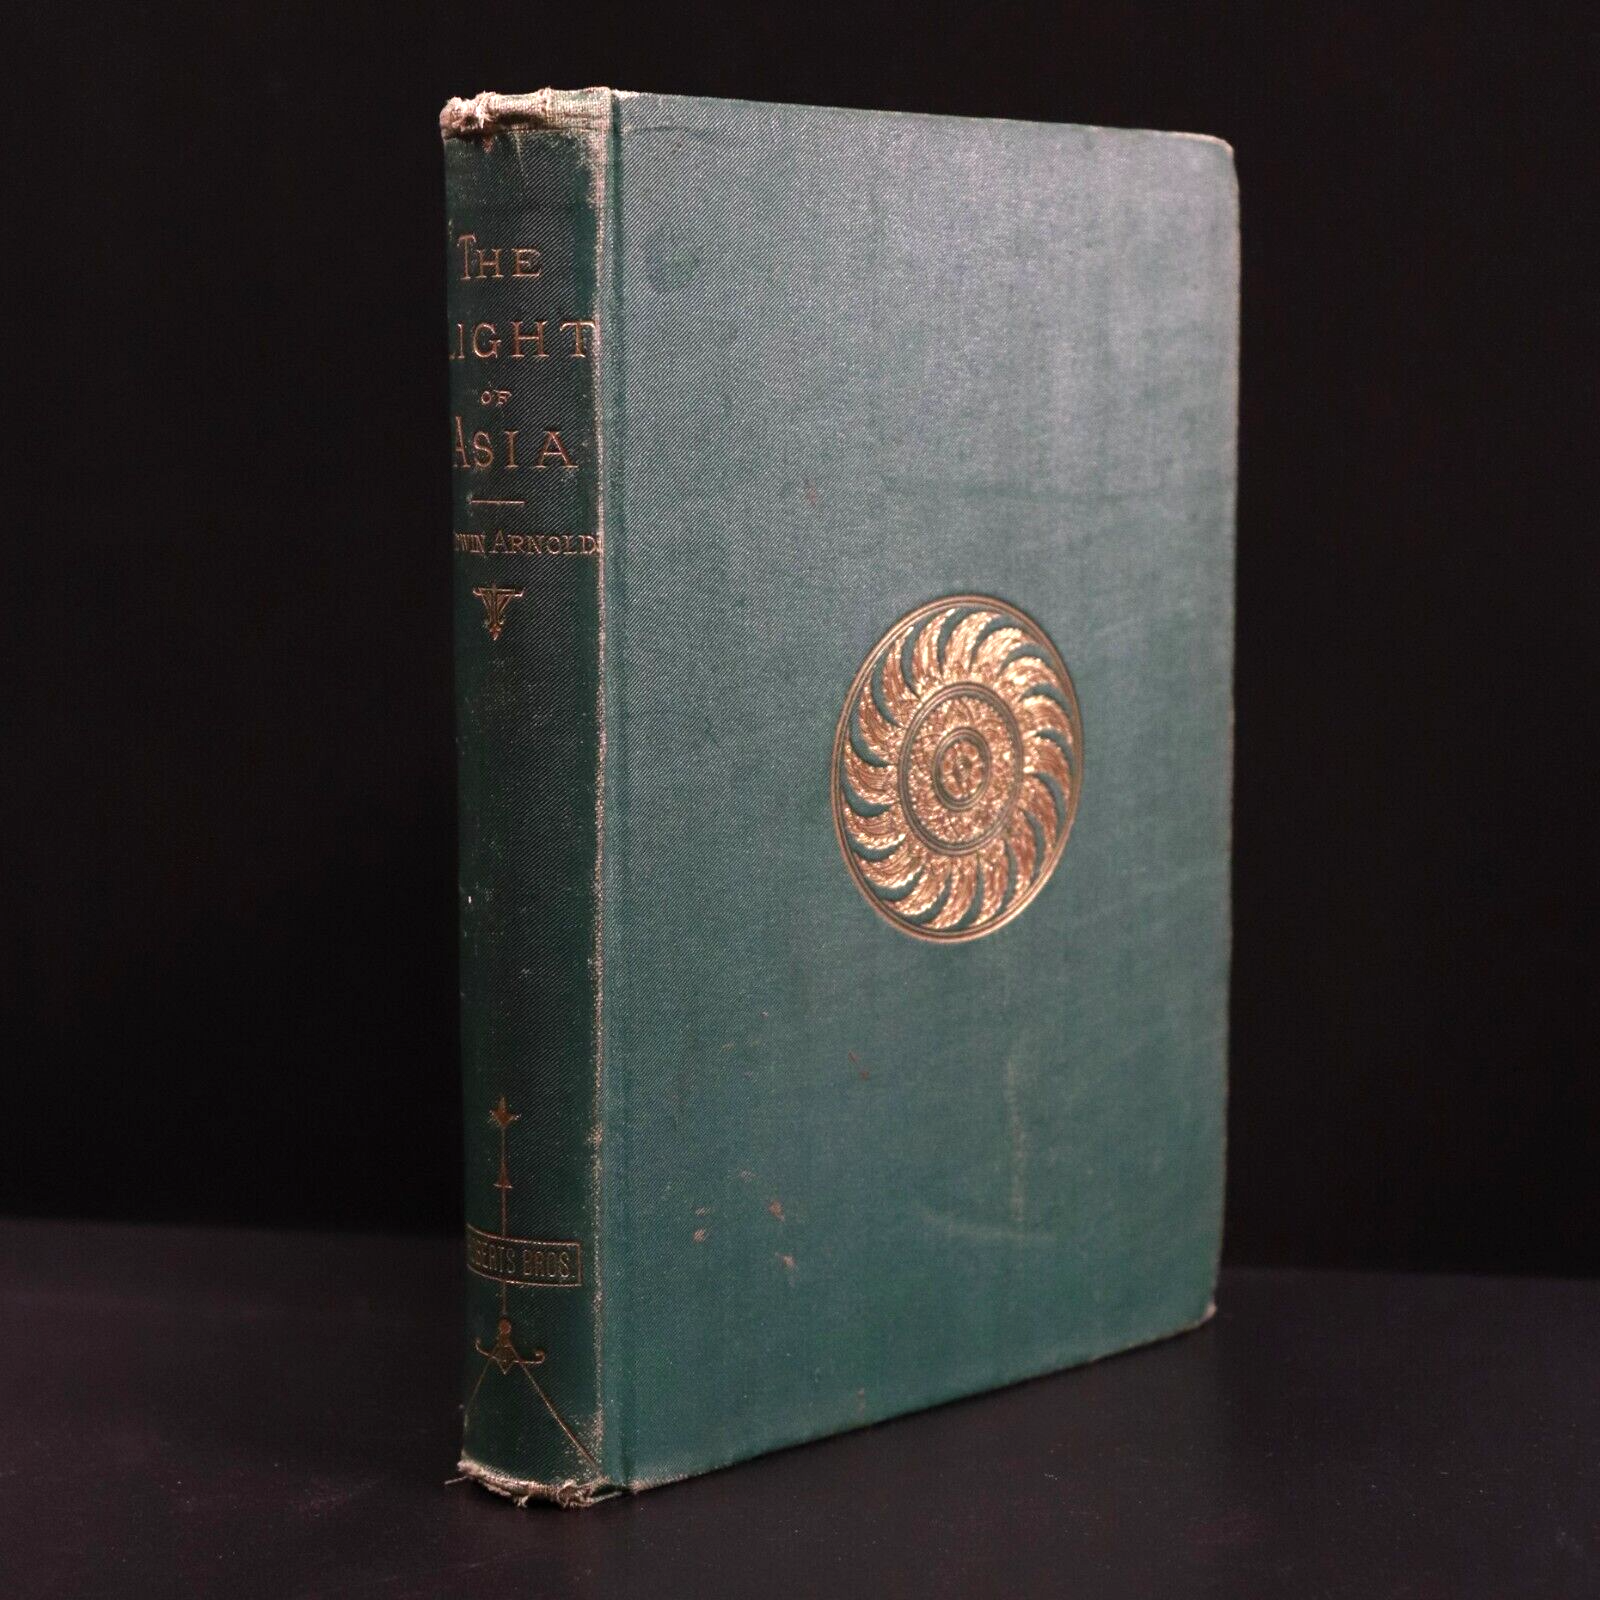 1883 The Light Of Asia by Edwin Arnold - Antique Poetry Book Buddhism India